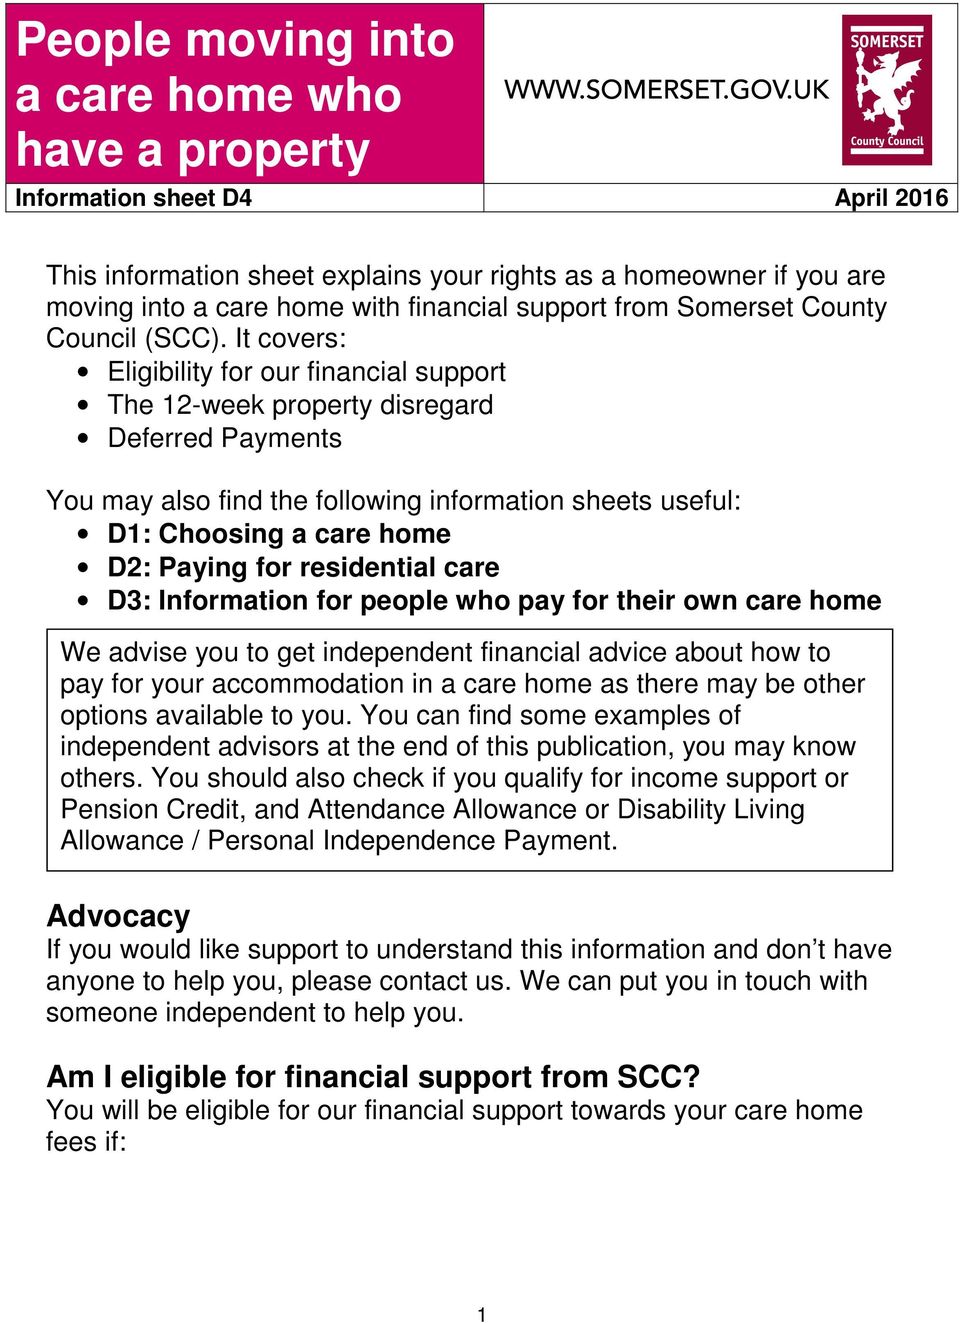 It covers: Eligibility for our financial support The 12-week property disregard Deferred Payments You may also find the following information sheets useful: D1: Choosing a care home D2: Paying for